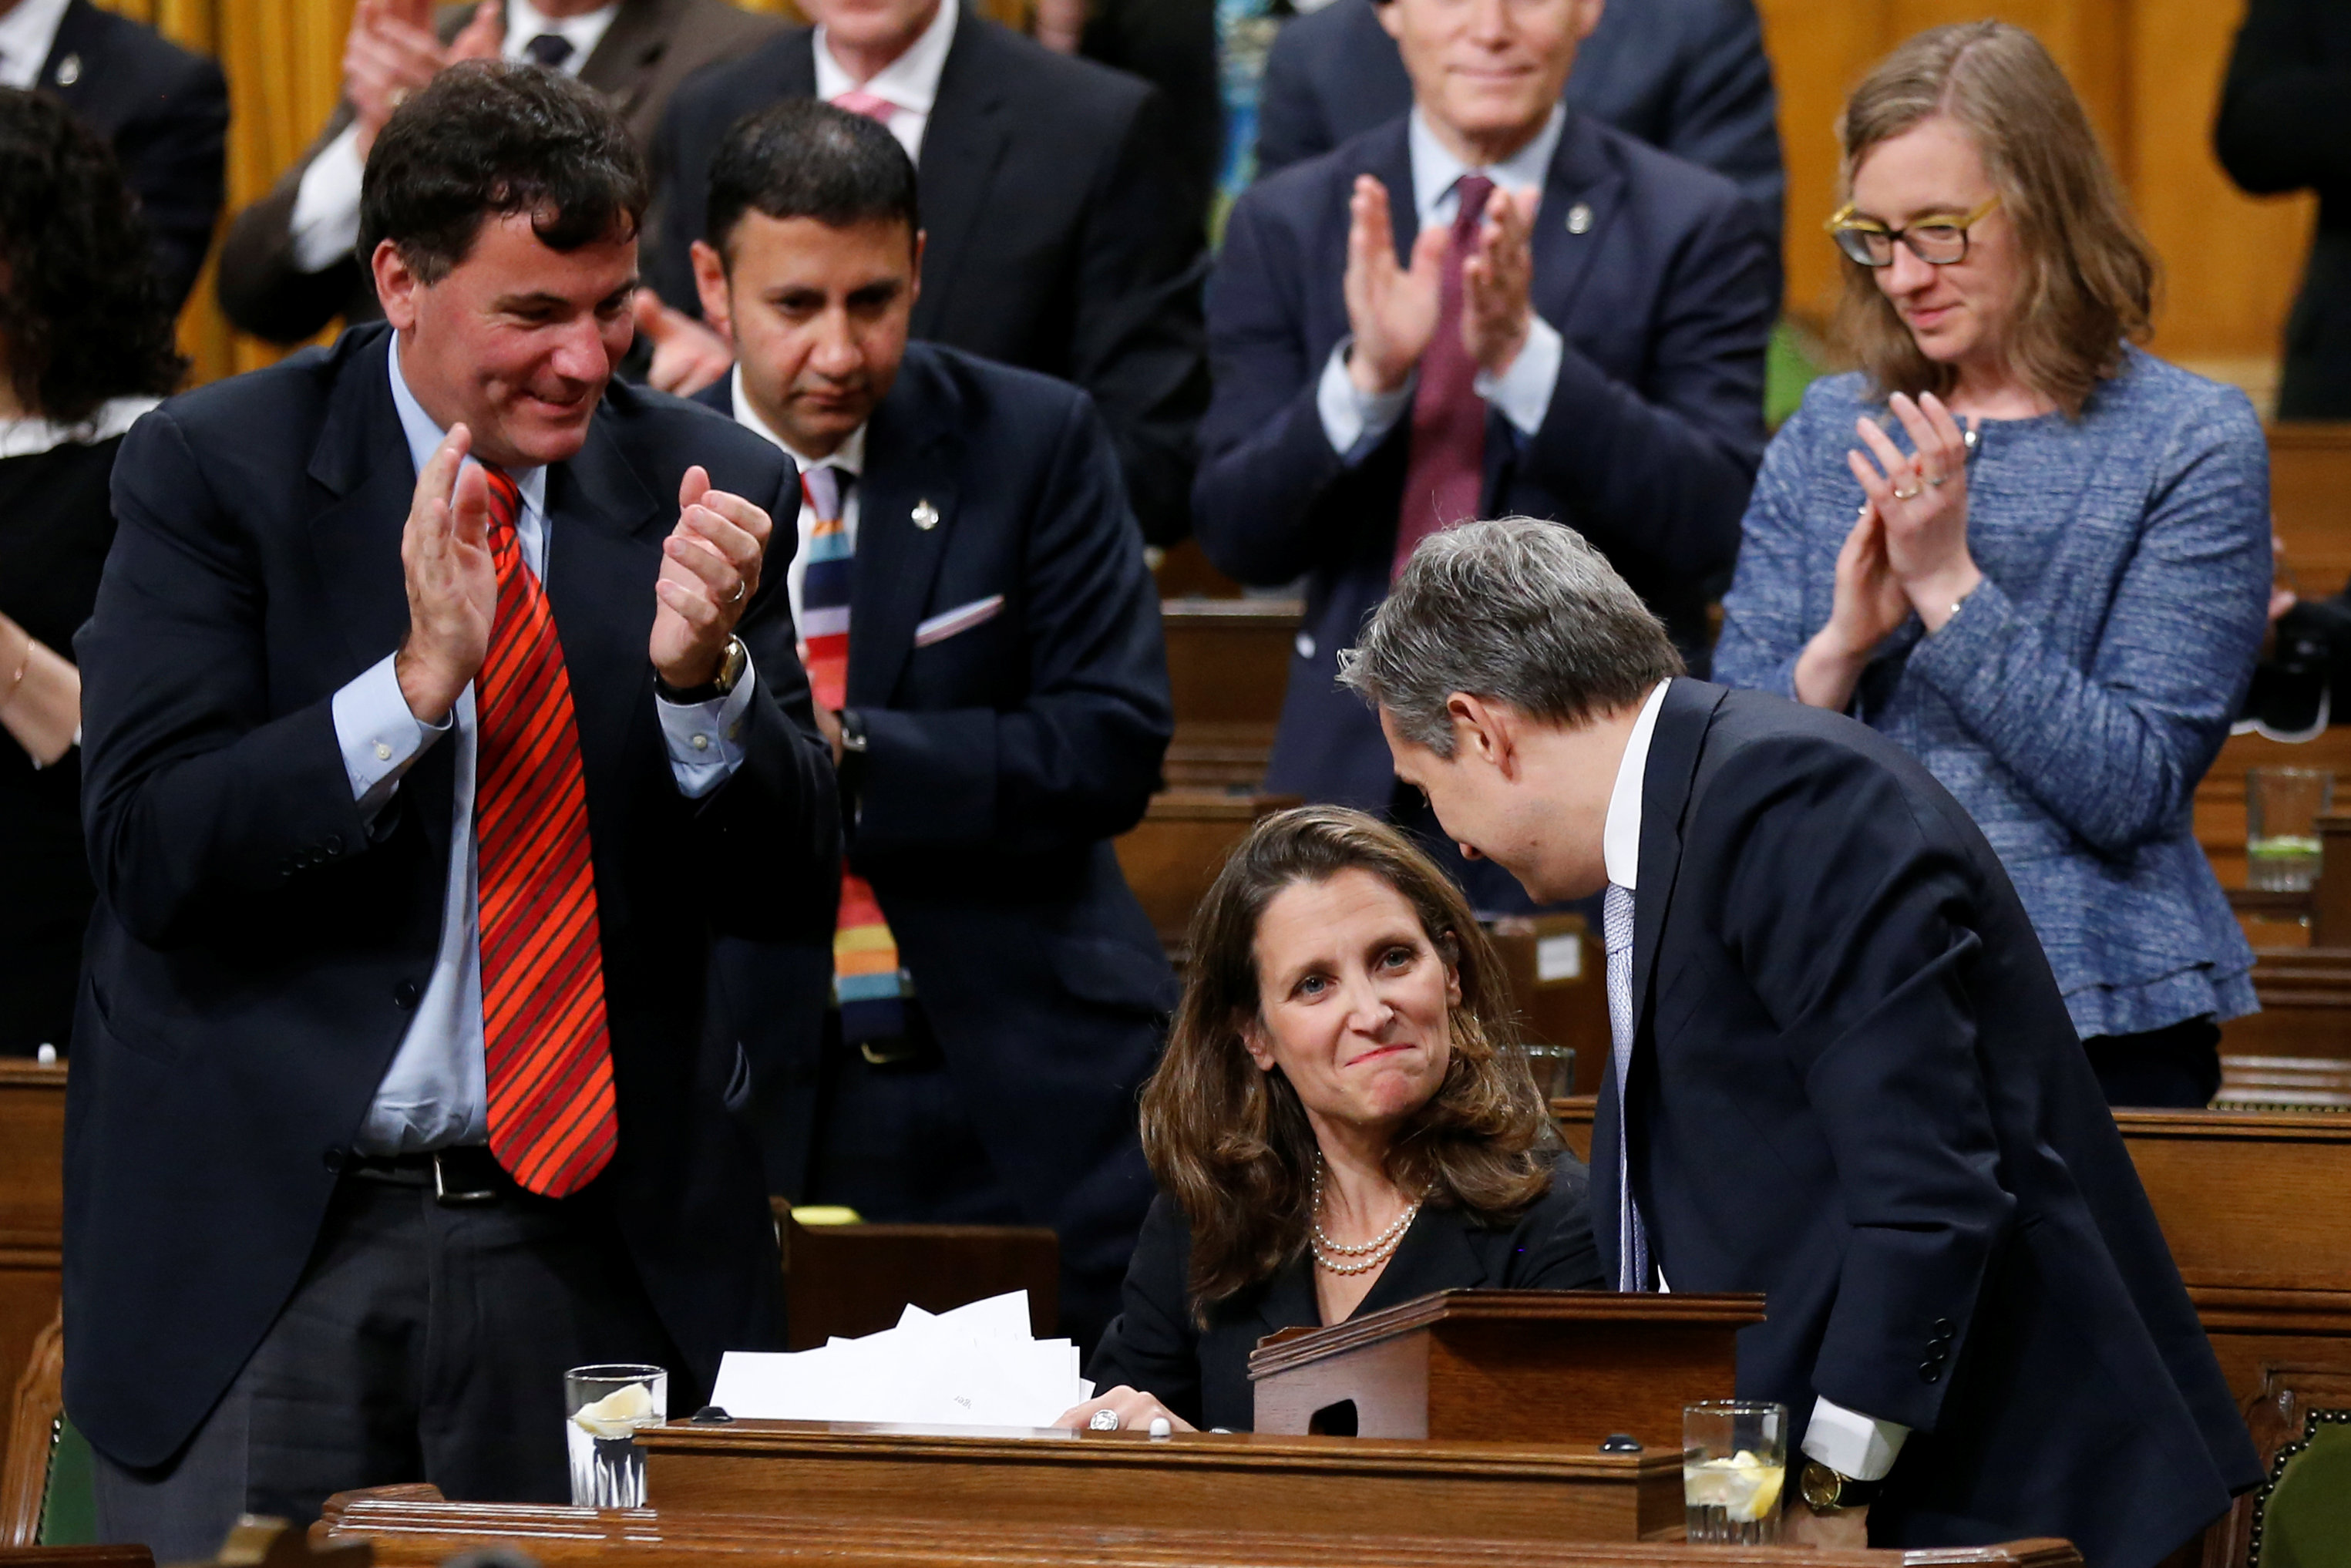 Canada's Foreign Affairs Minister Chrystia Freeland receives a standing ovation after delivering a speech on Canada's foreign policy in the House of Commons on Parliament Hill in Ottawa, Ontario, Canada June 6, 2017. (Chris Wattie / Reuters)